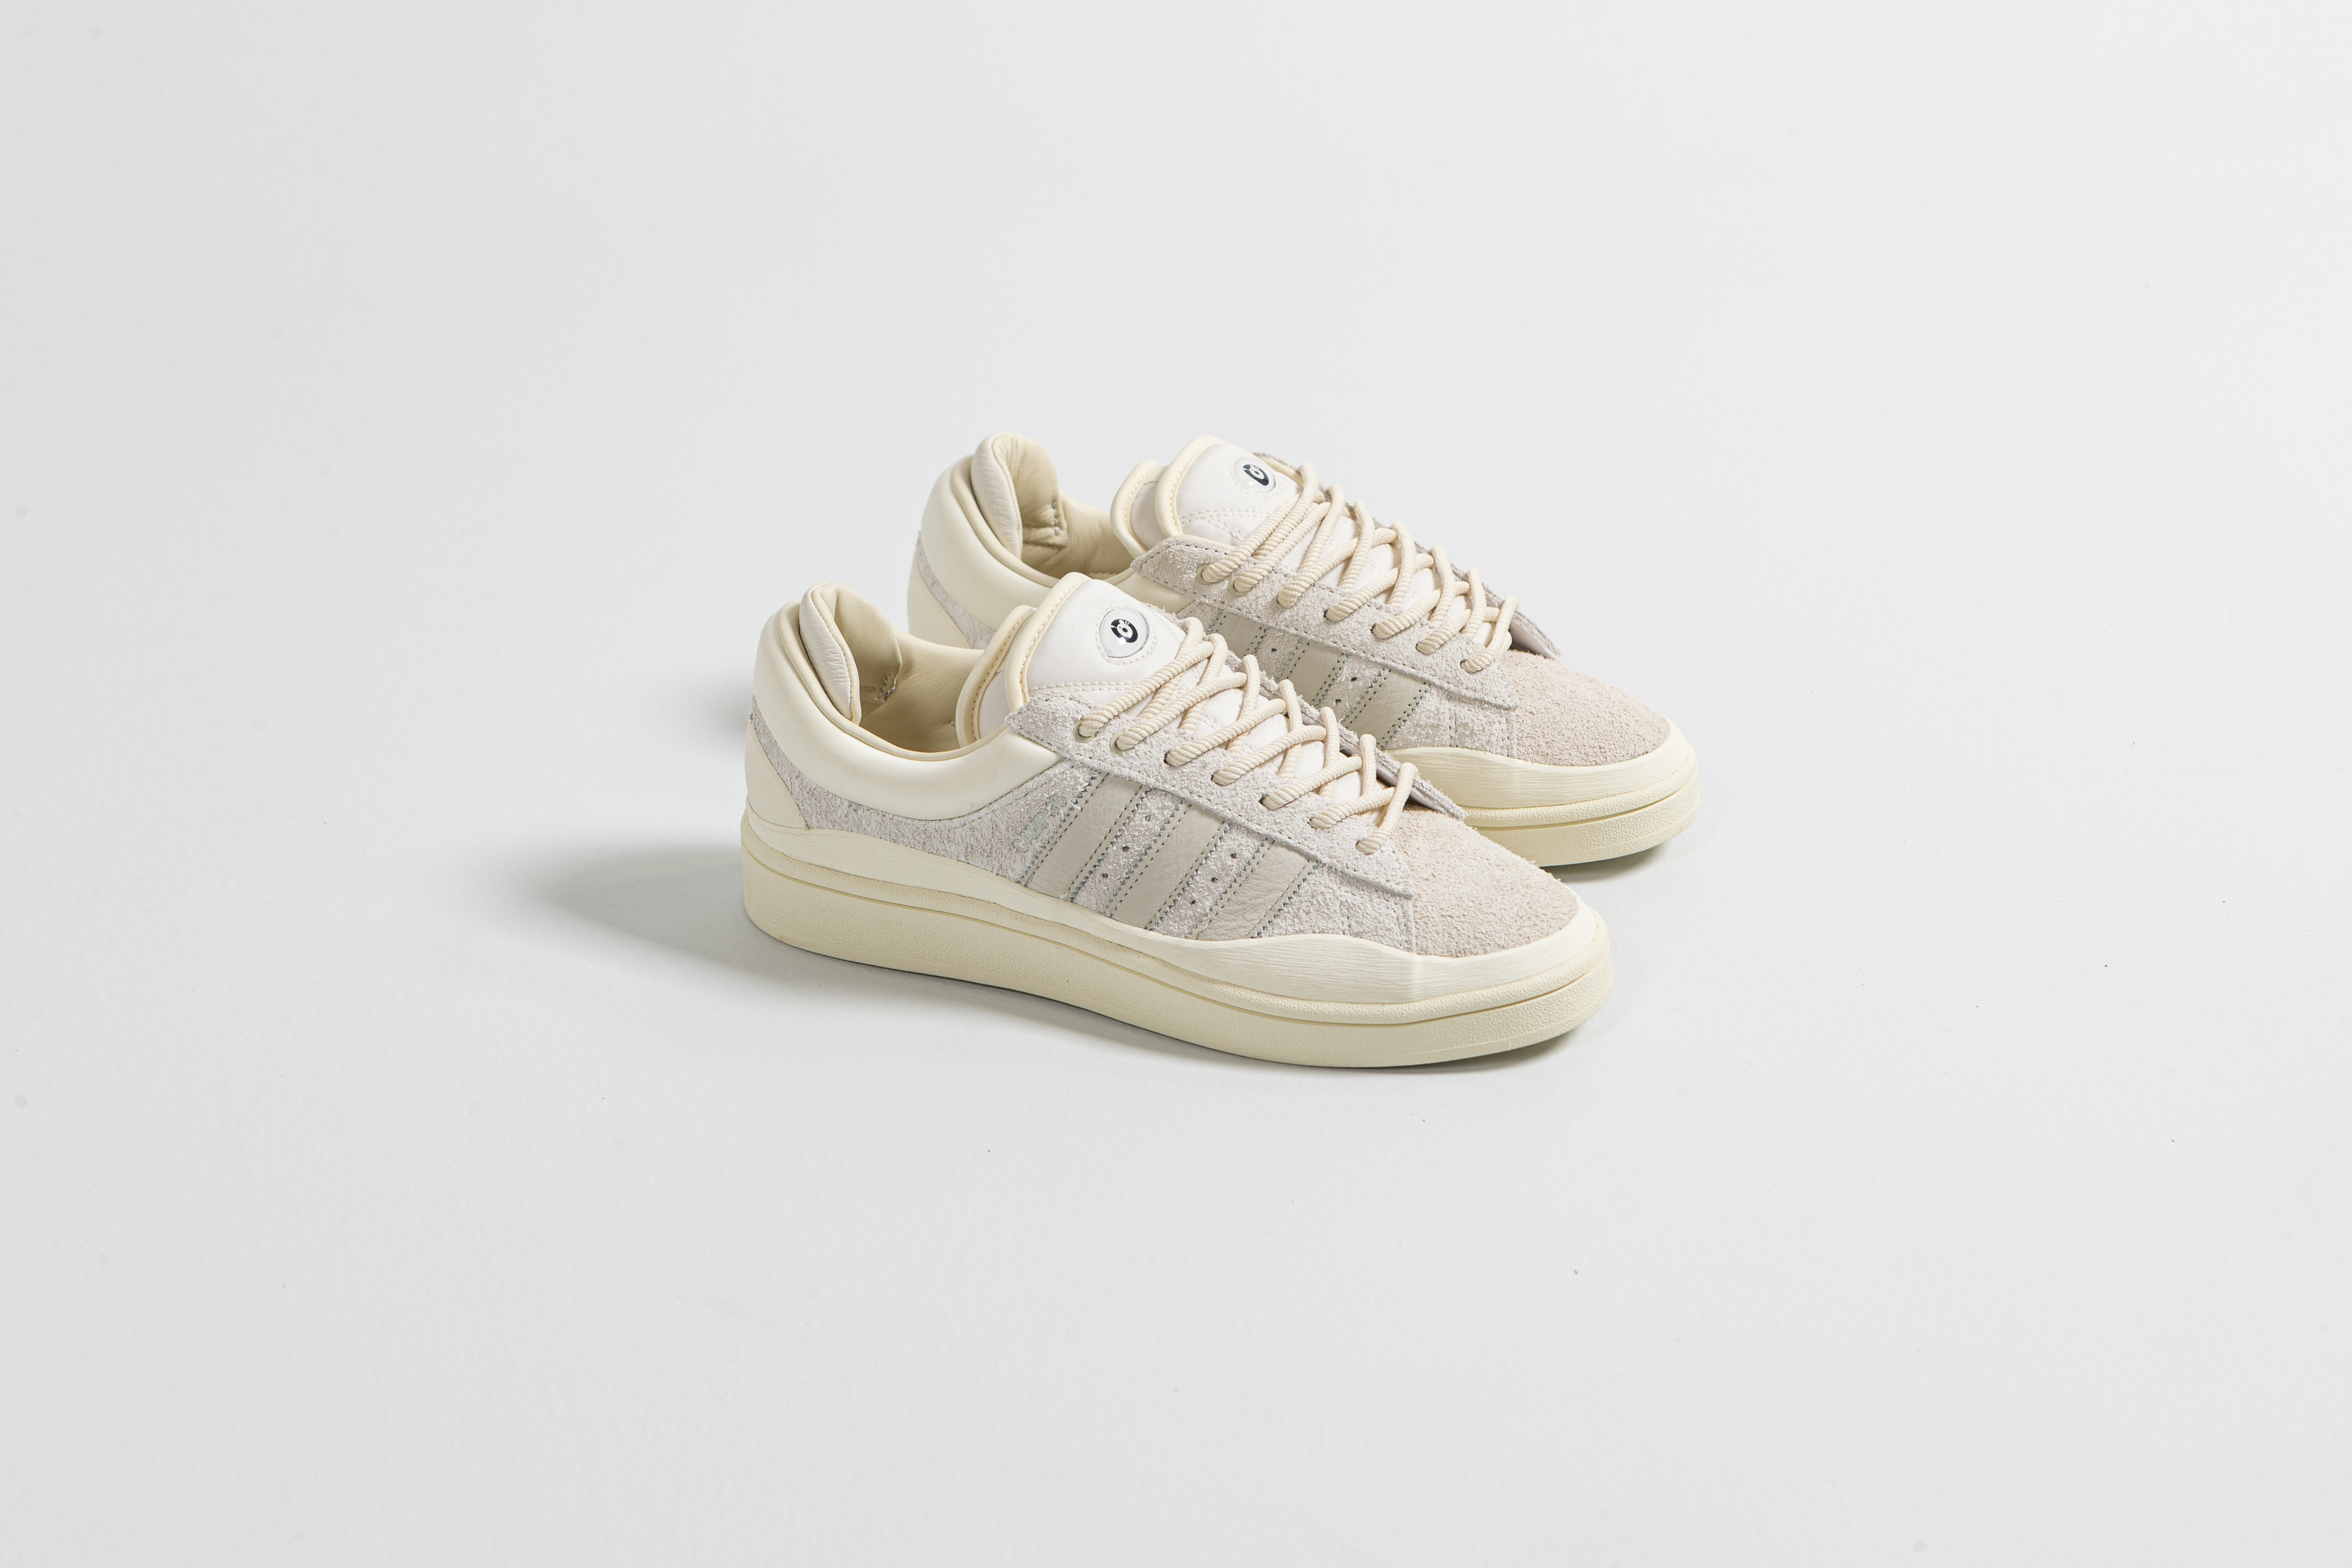 adidas - Bad Bunny Campus - Footwear White/Aluminum-Cloud White - Up There